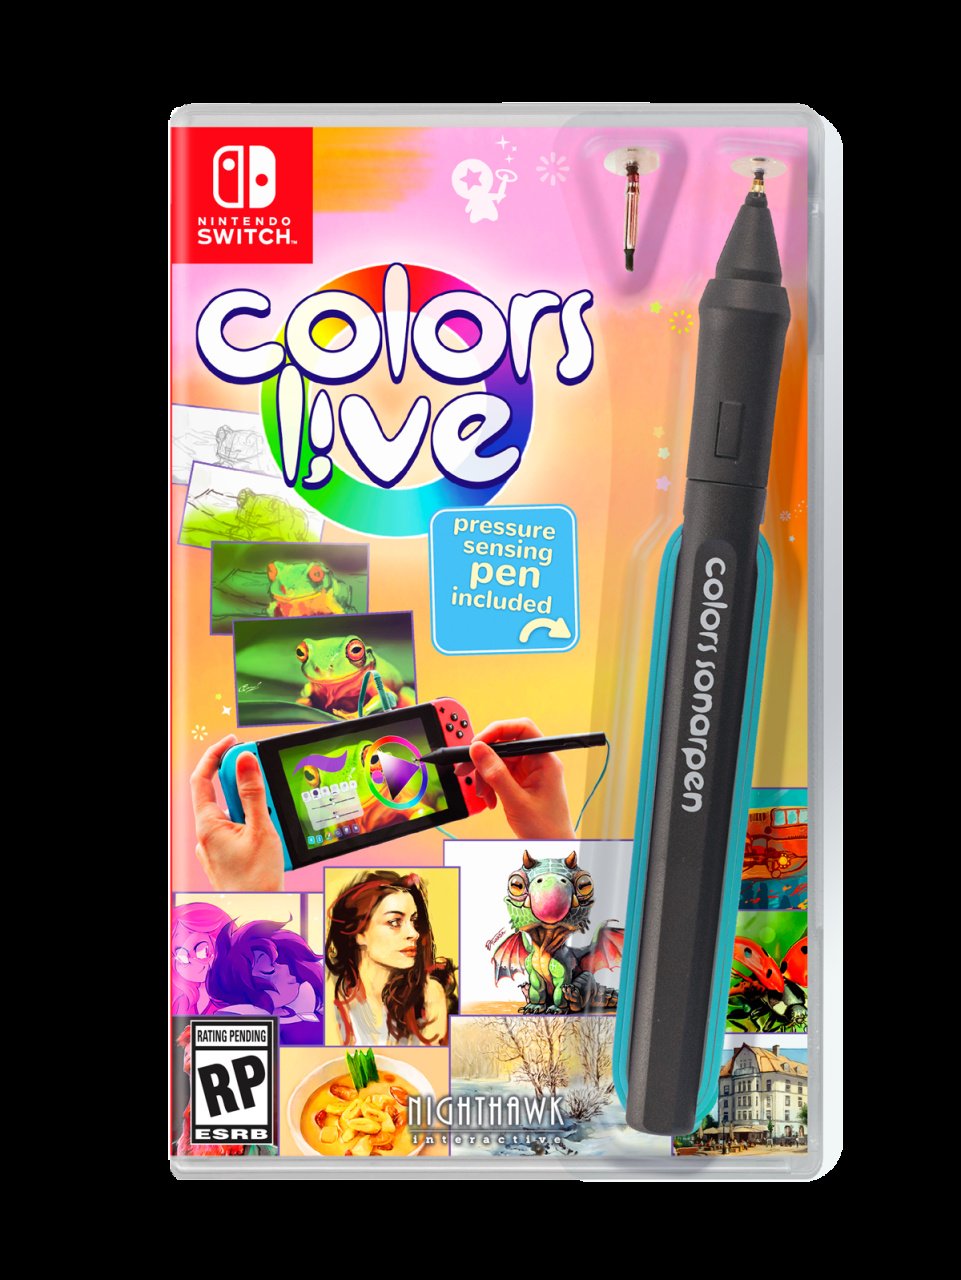 Colors Live for Nintendo Switch - Nintendo Official Site